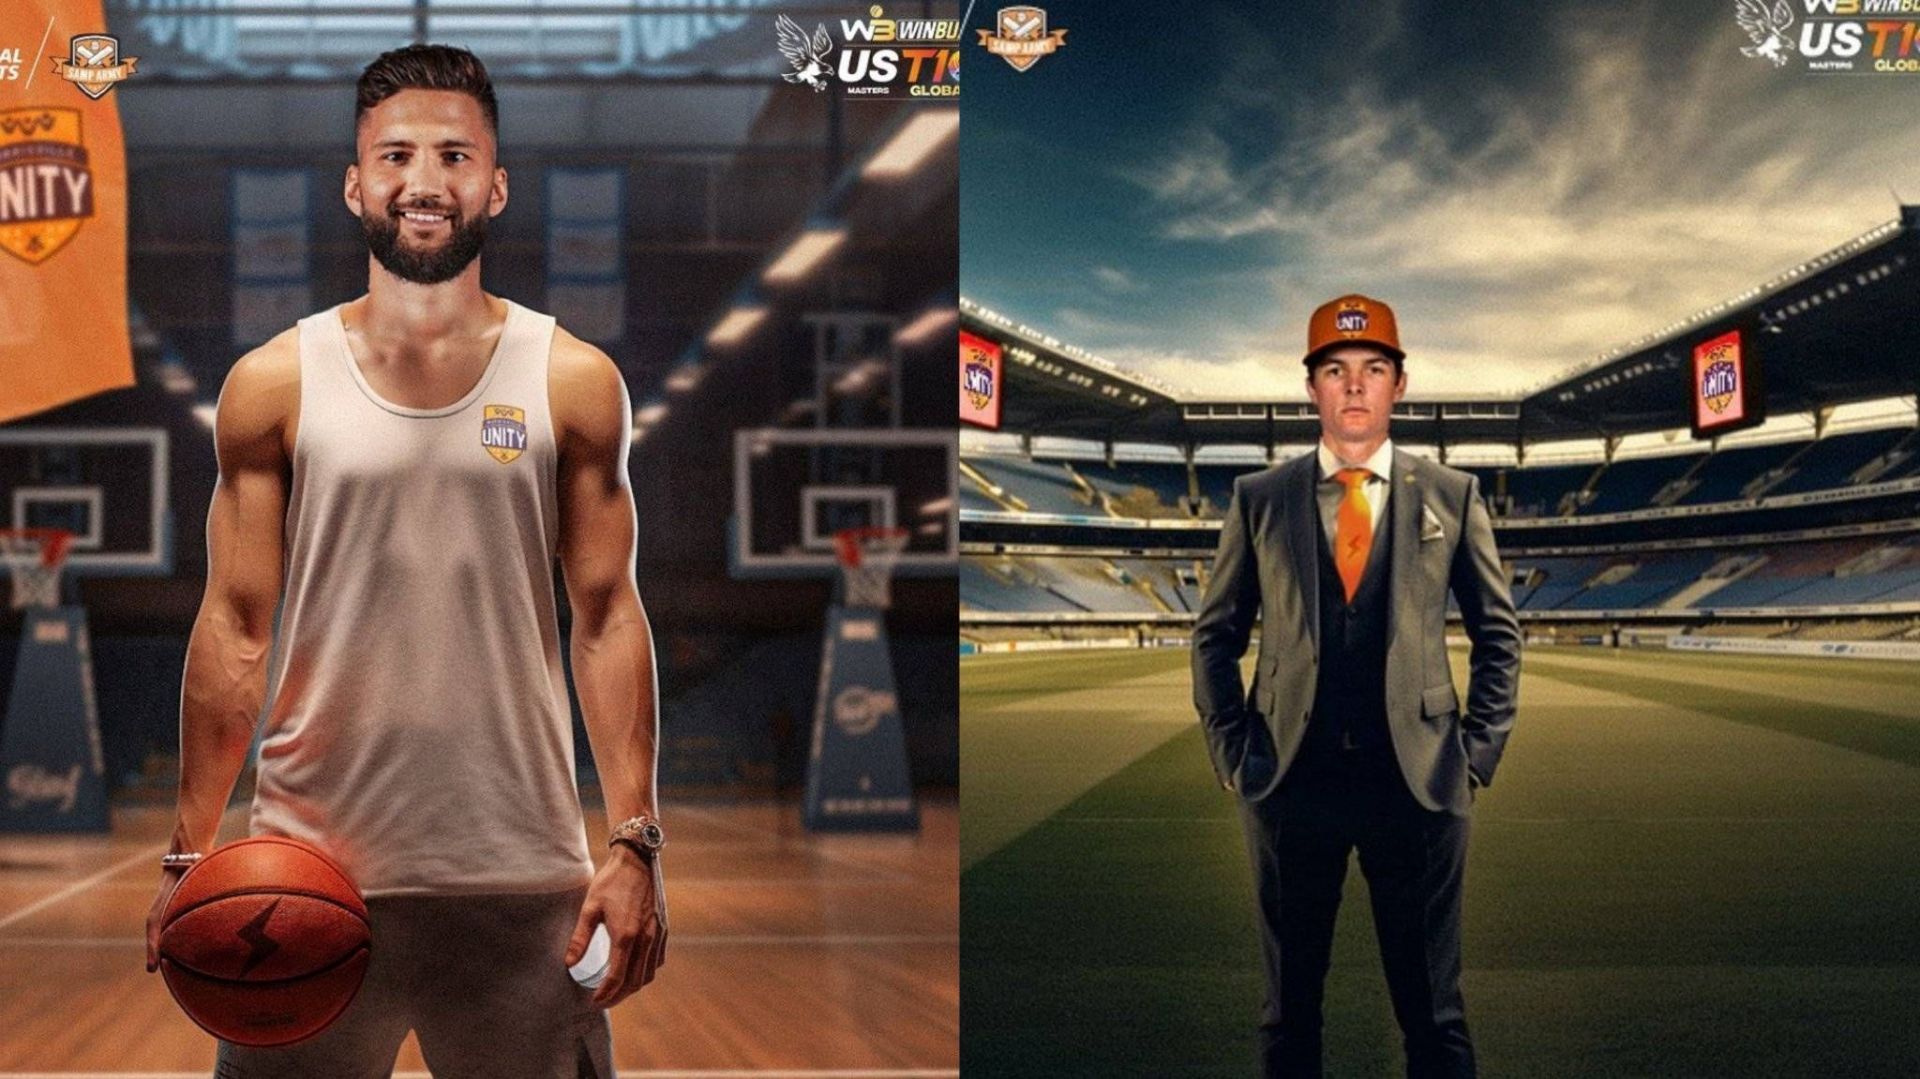 US Masters T10 League has some celebrity owners (Image: Instagram)